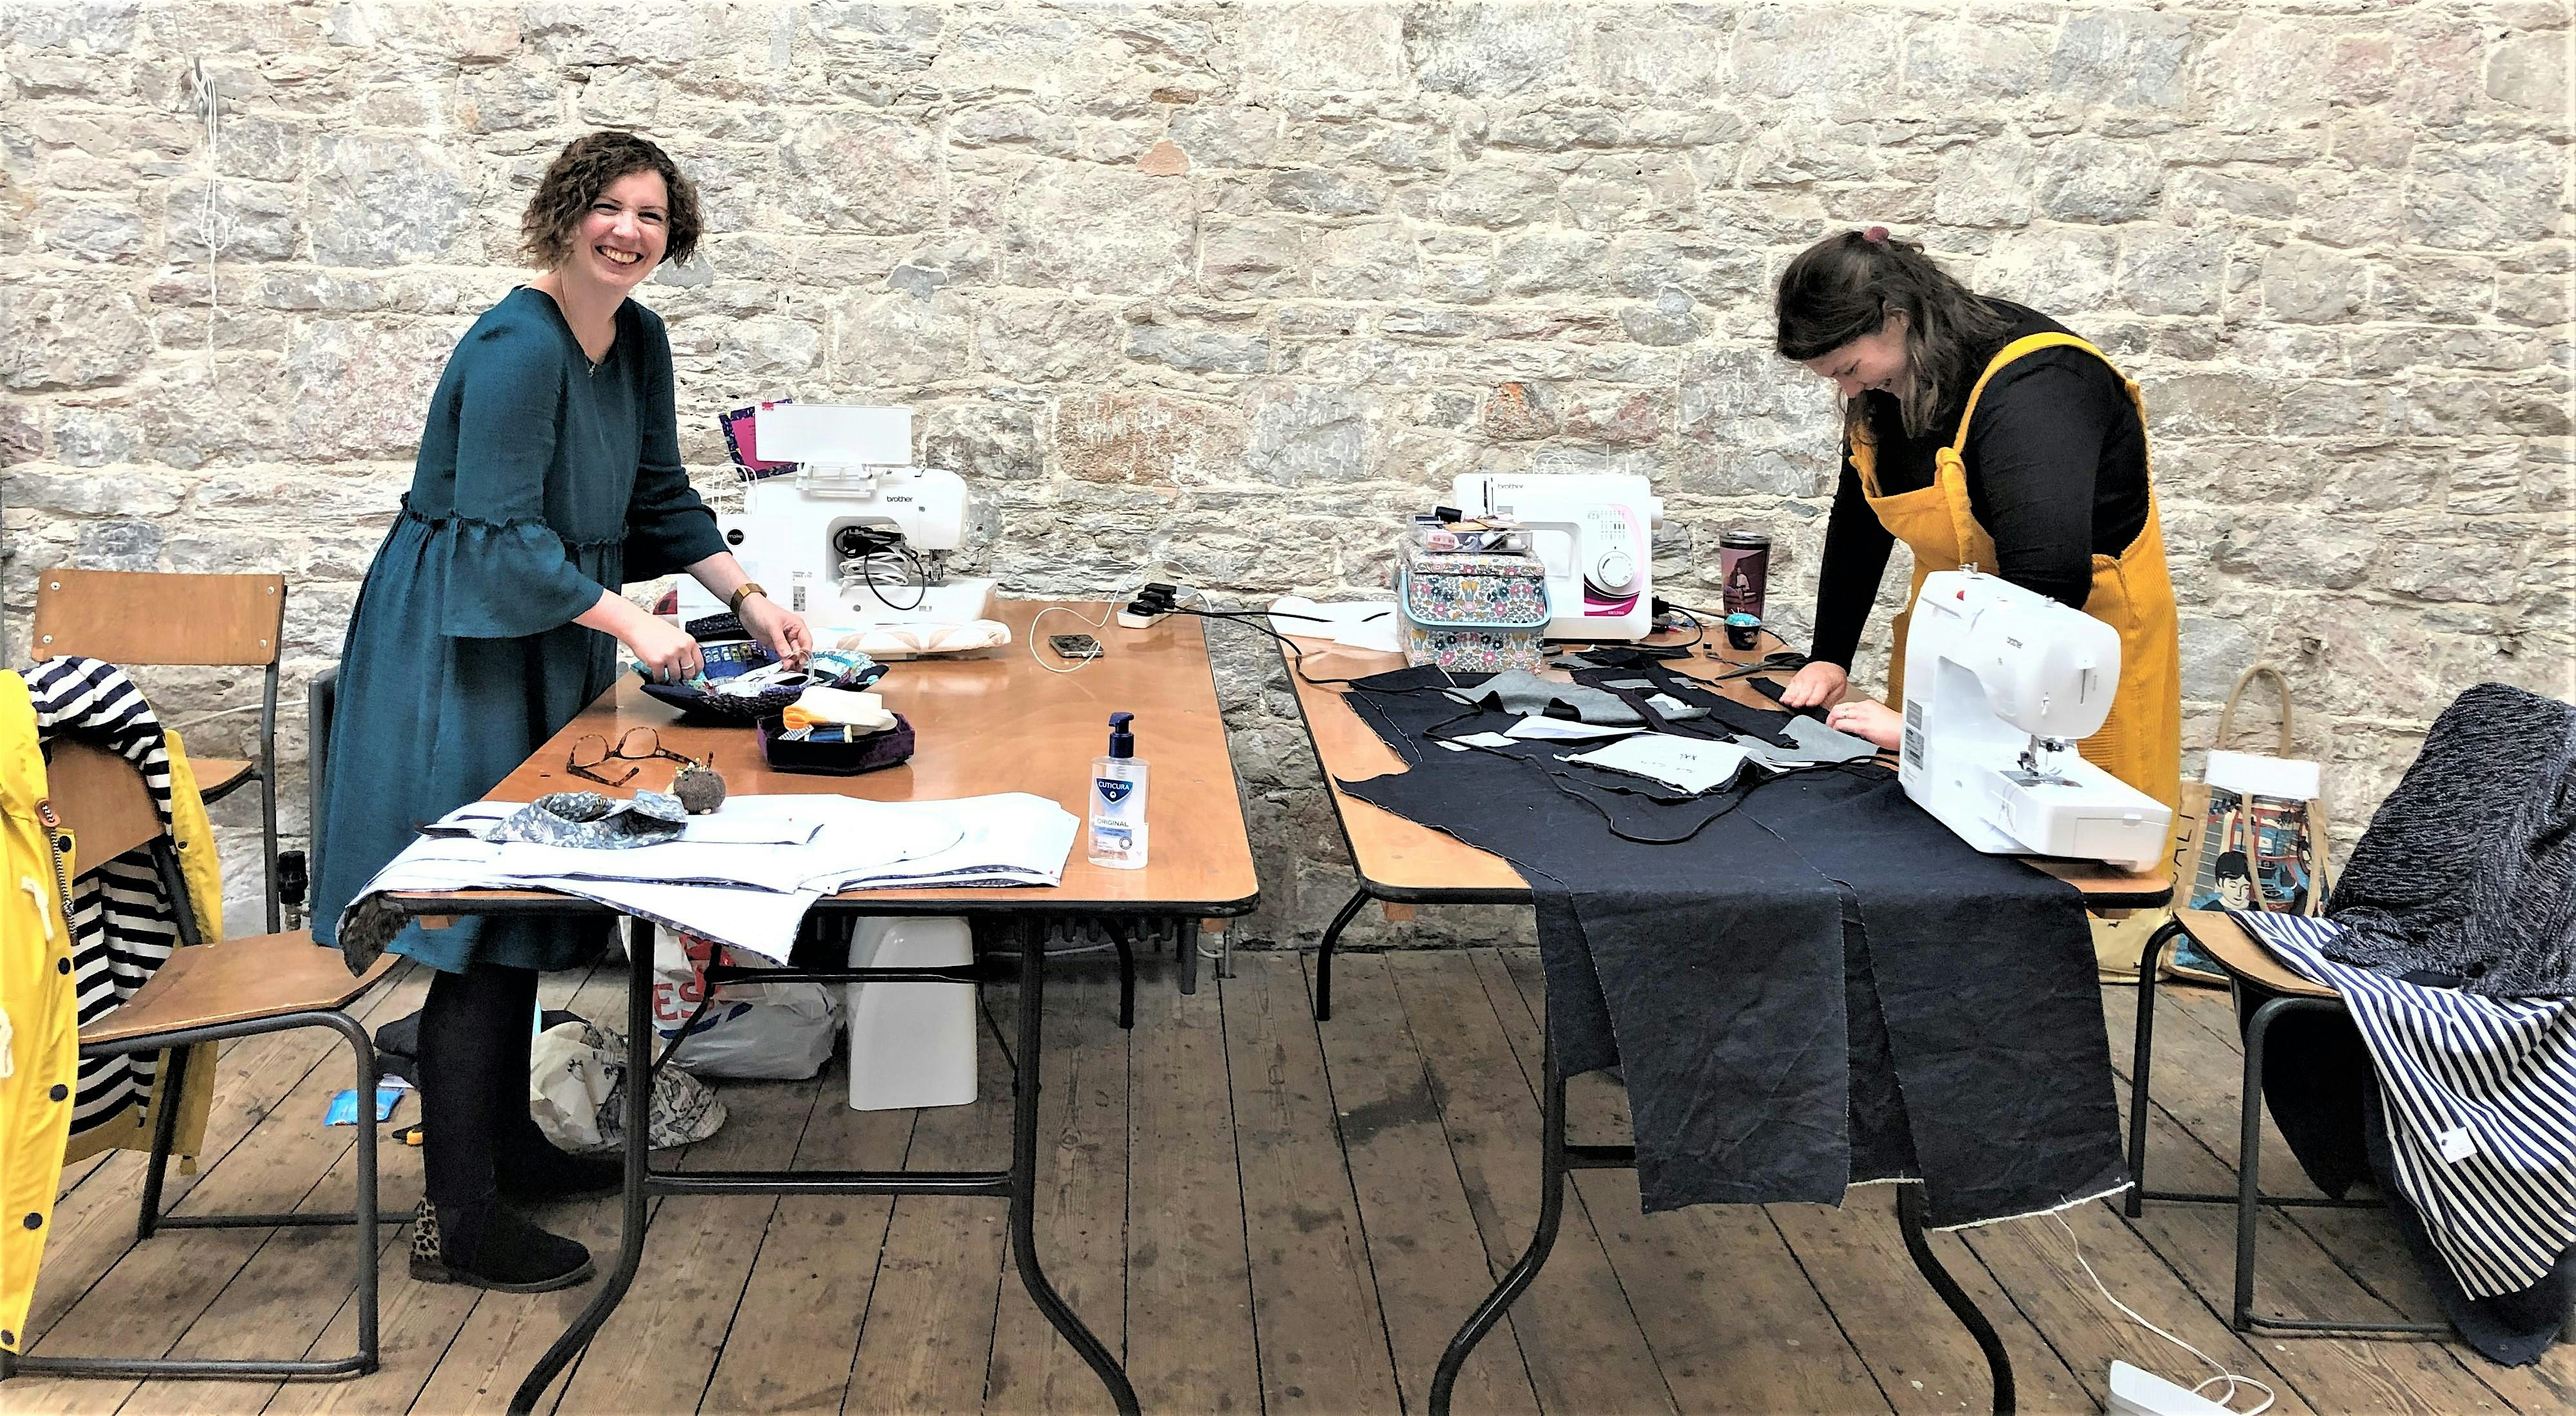 Sewcial Sewing: Plymouth Sewing Community Fun and Productive Gathering!